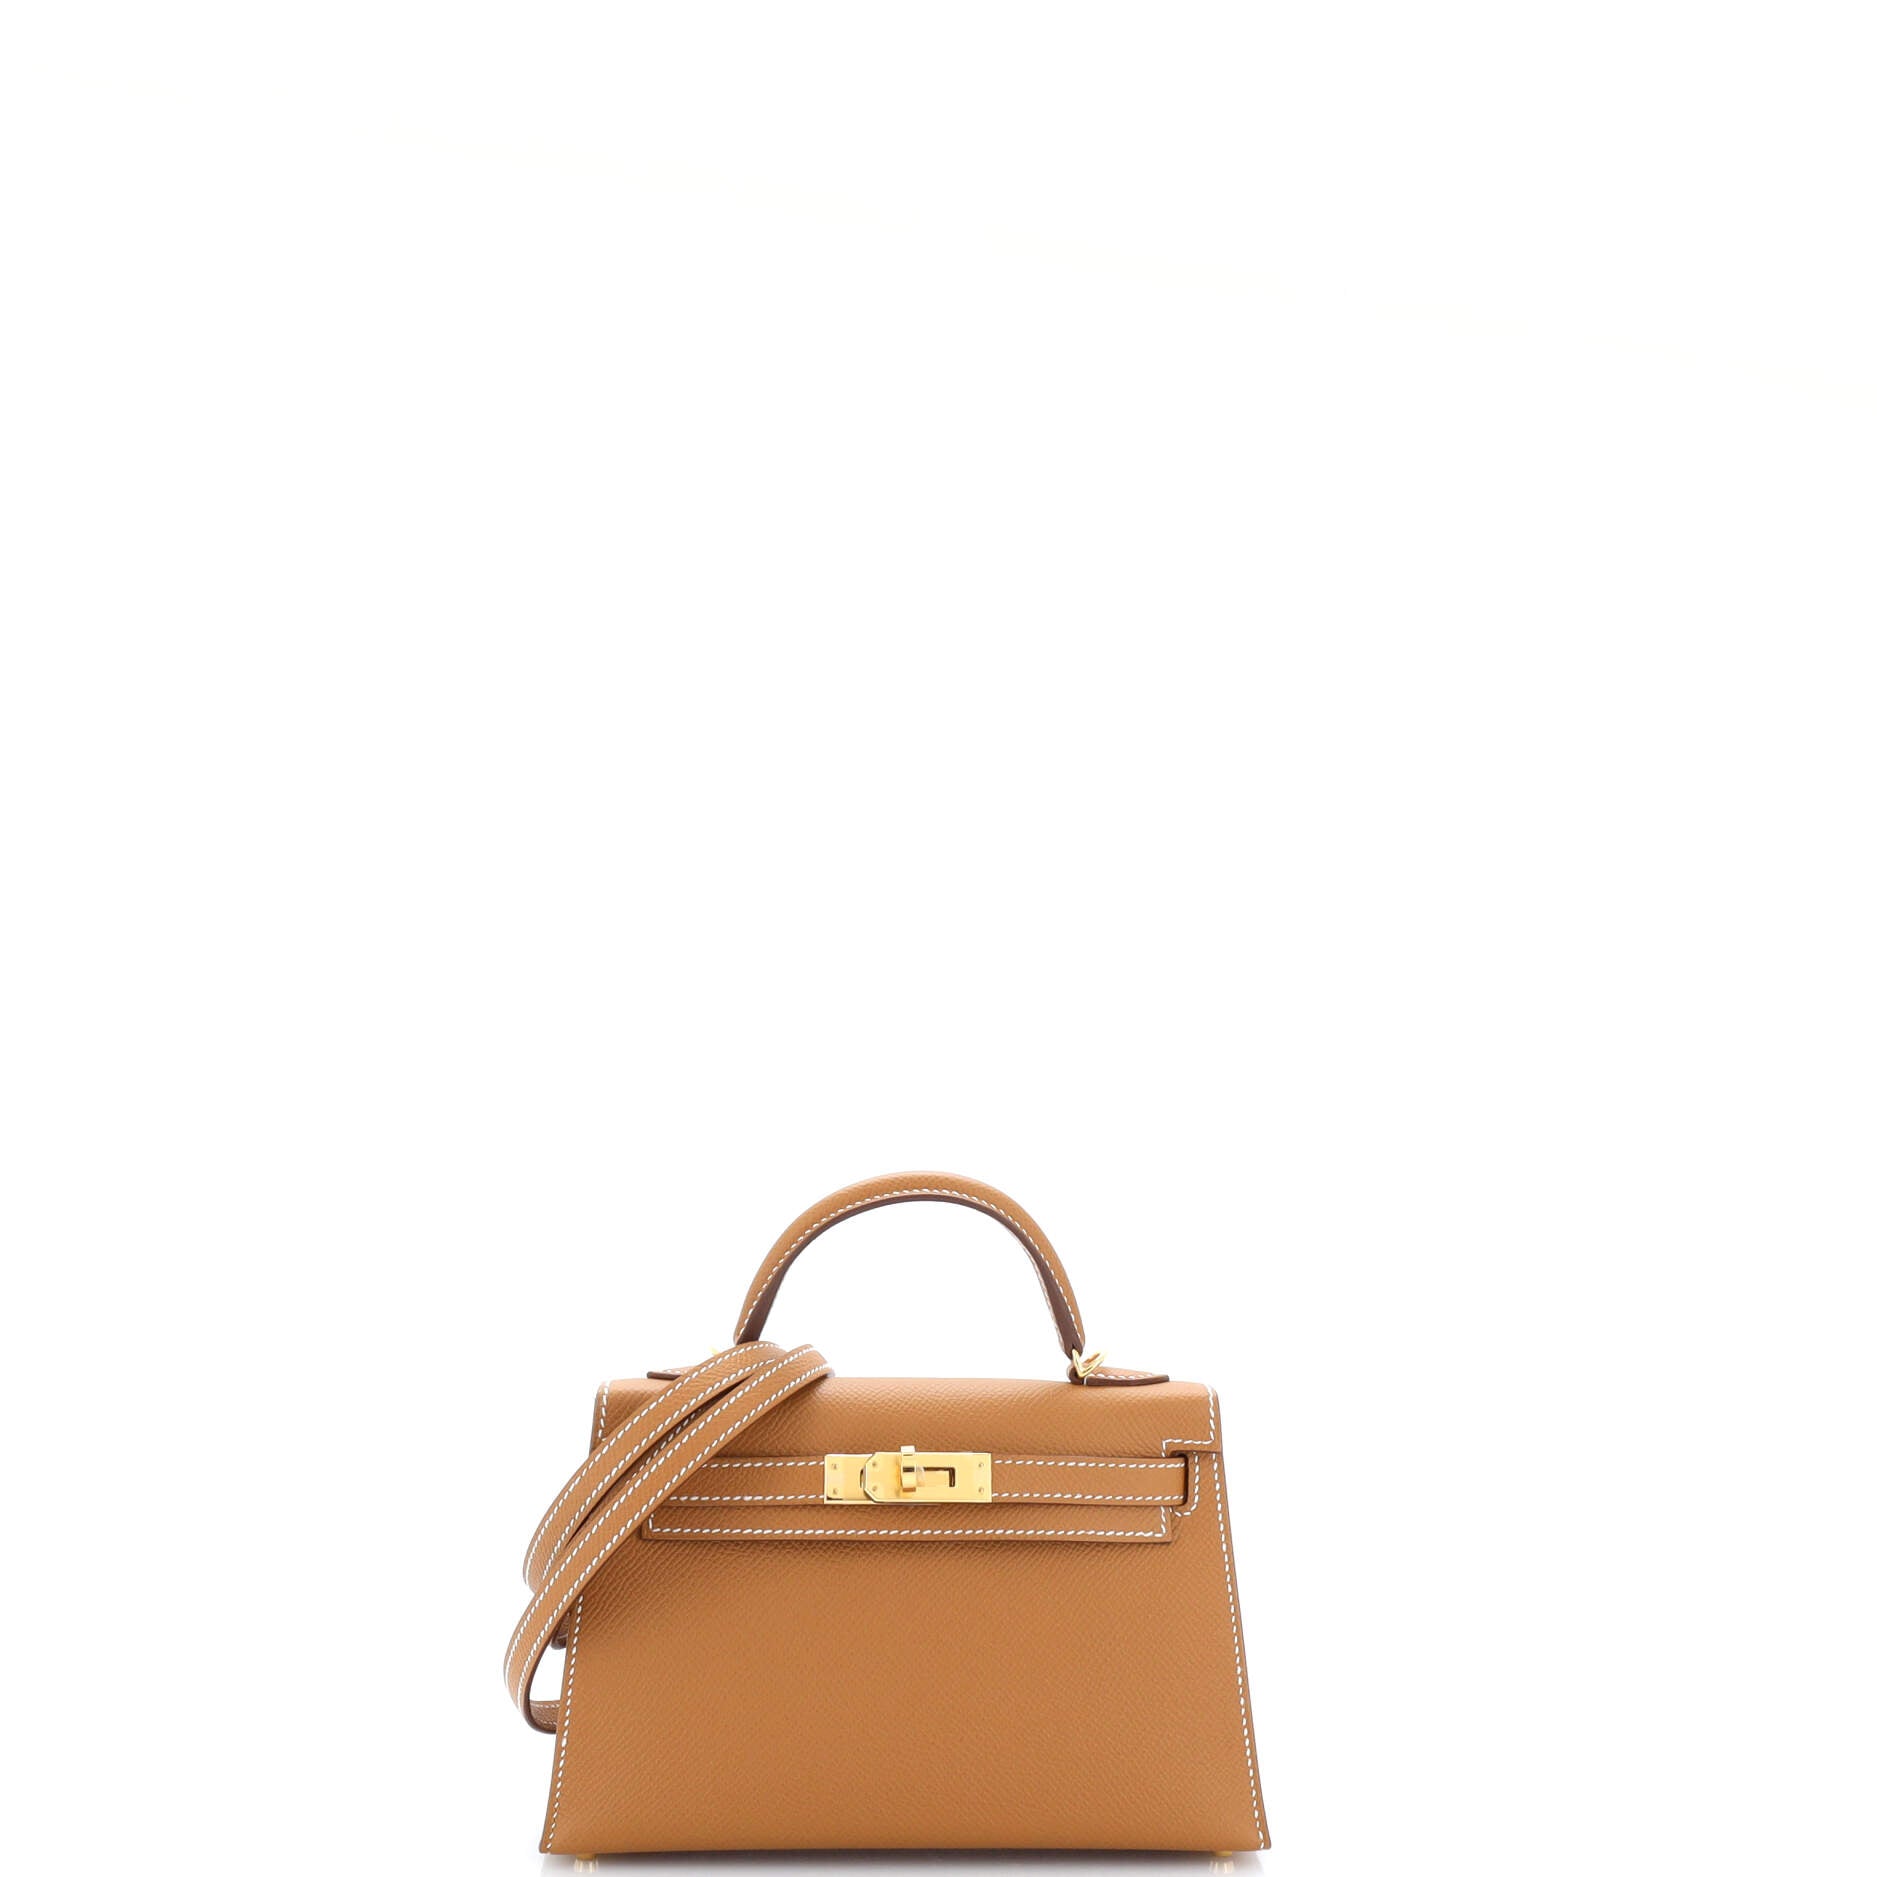 AN AMBRE EPSOM LEATHER MINI KELLY 20 II WITH GOLD HARDWARE